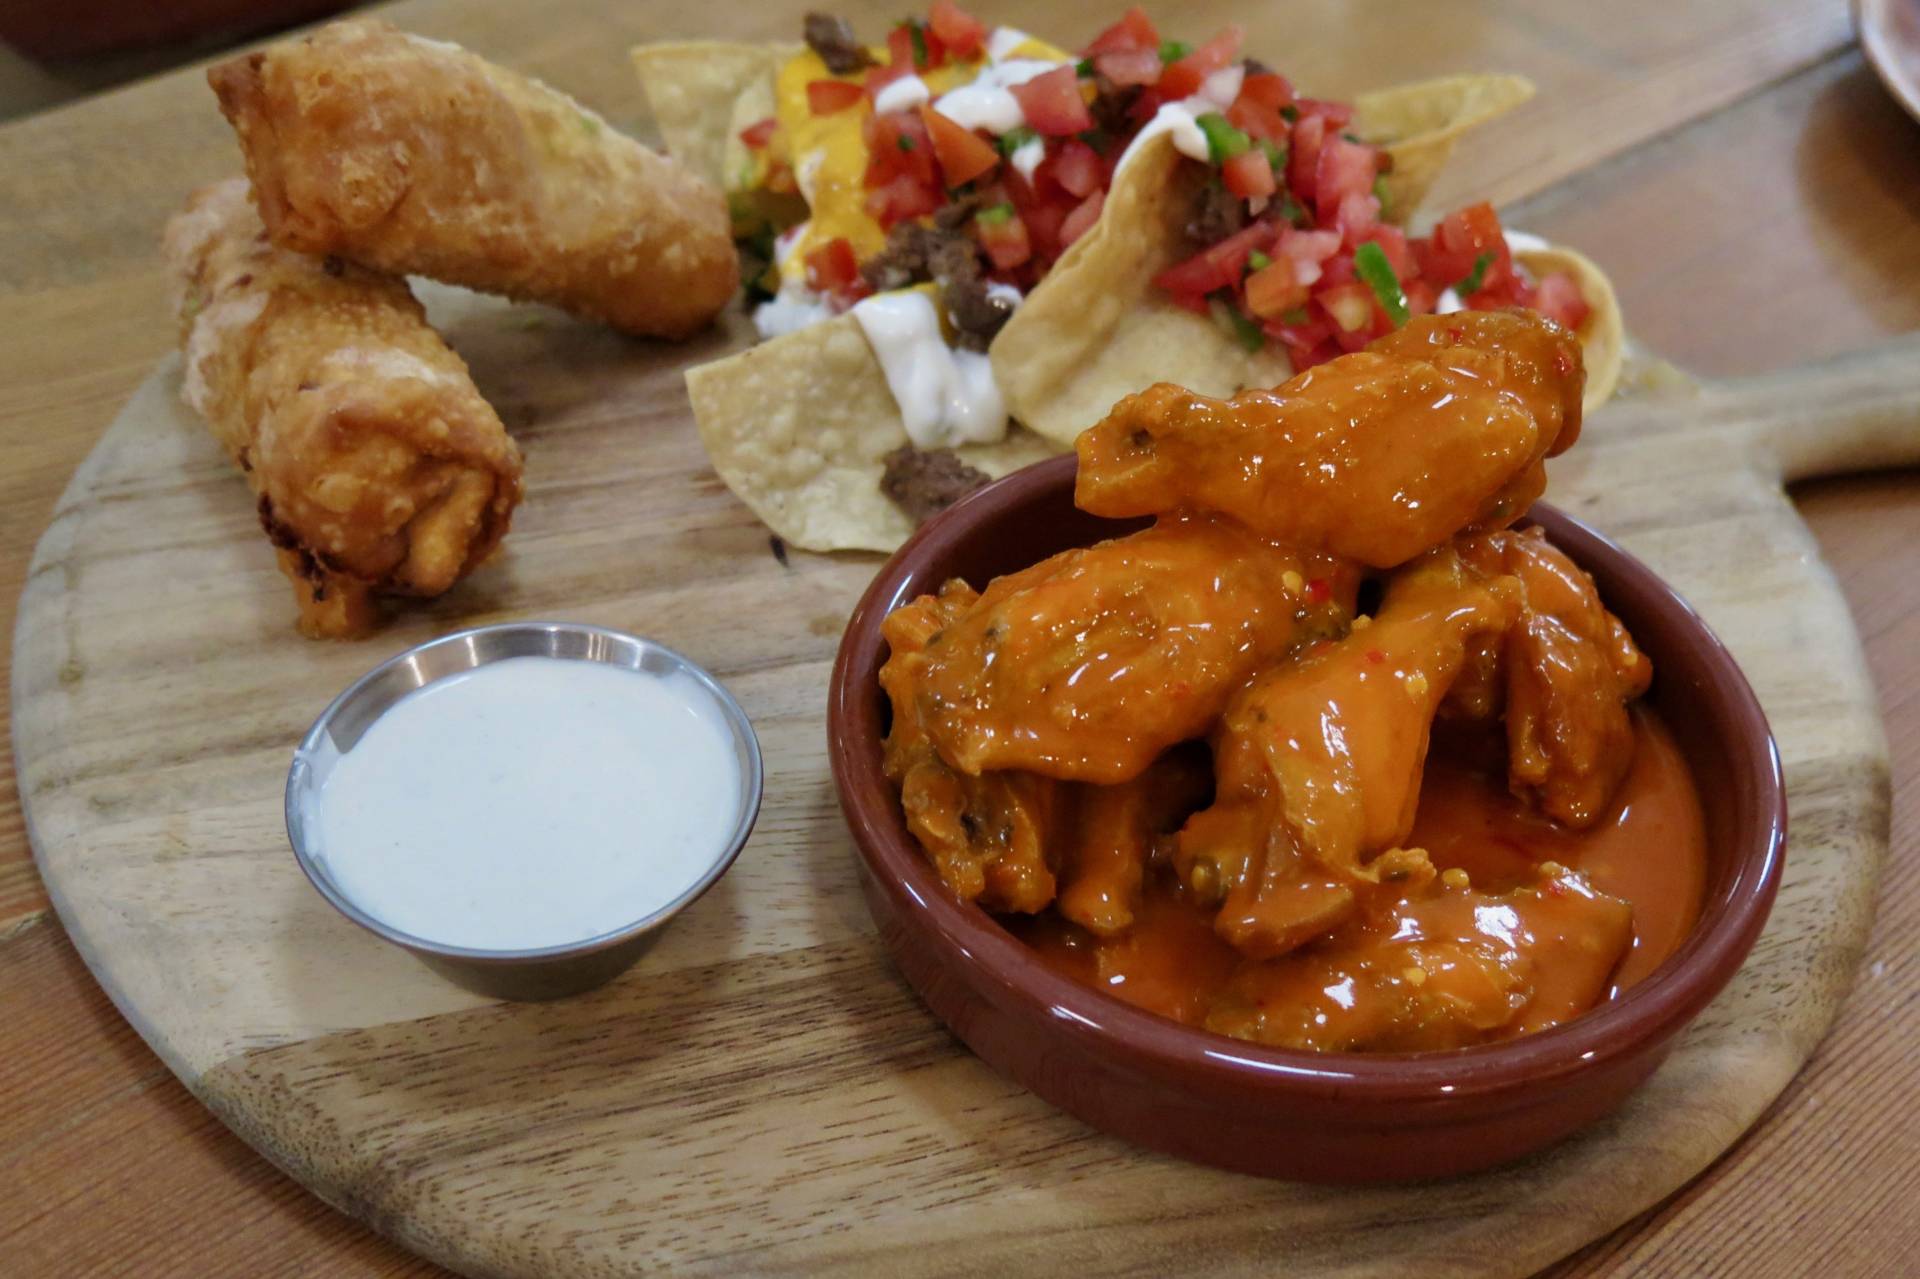 The Board also offers some wicked snacks, from spicy wings to Board rolls to nachos.